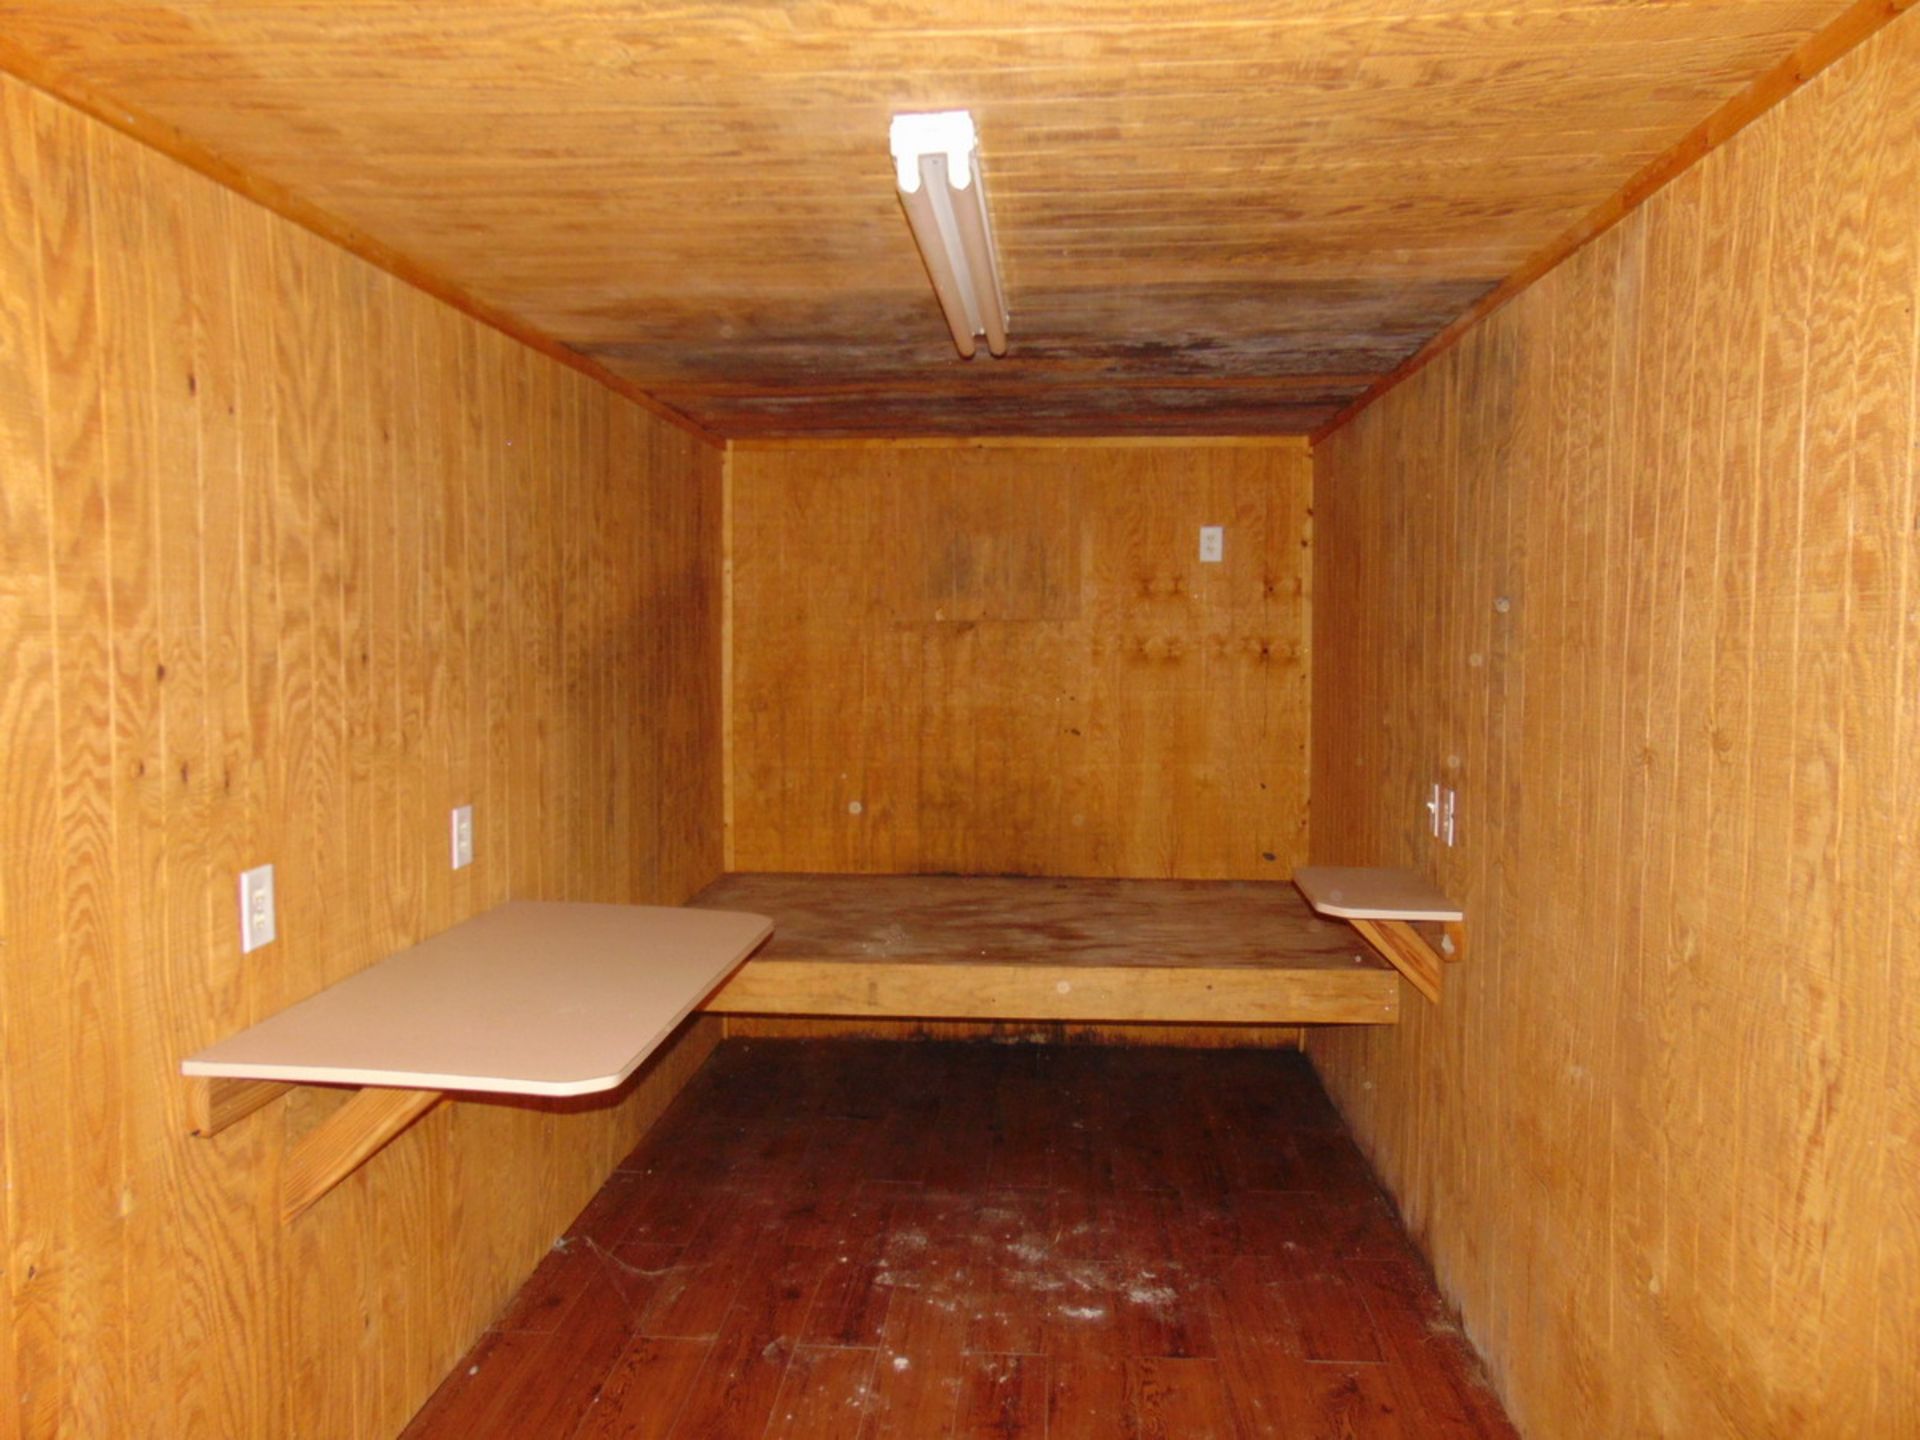 1996 Bedroom Accommodation Container 20' X 8' - Image 3 of 4